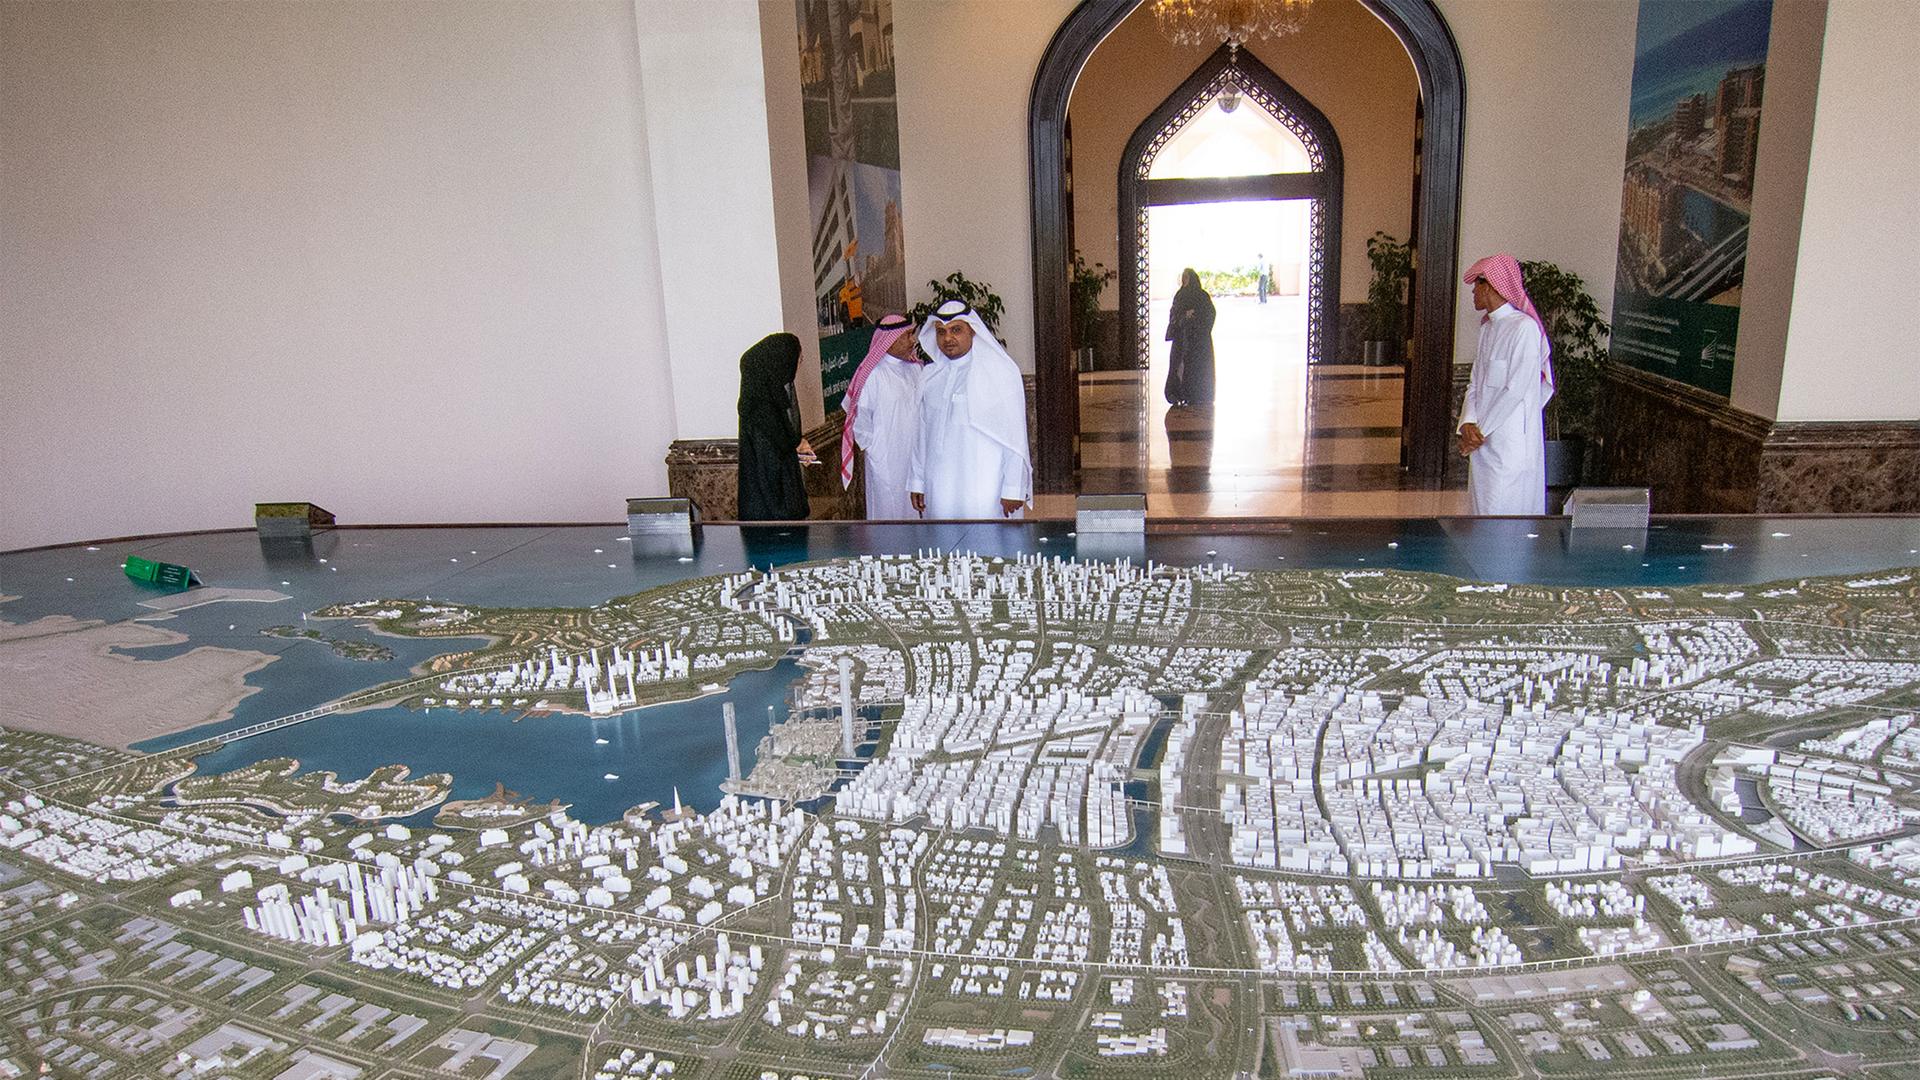 Build it, and they will come: The dream of King Abdullah Economic City, Saudi Arabia. Join the journey at outofedenwalk.org.